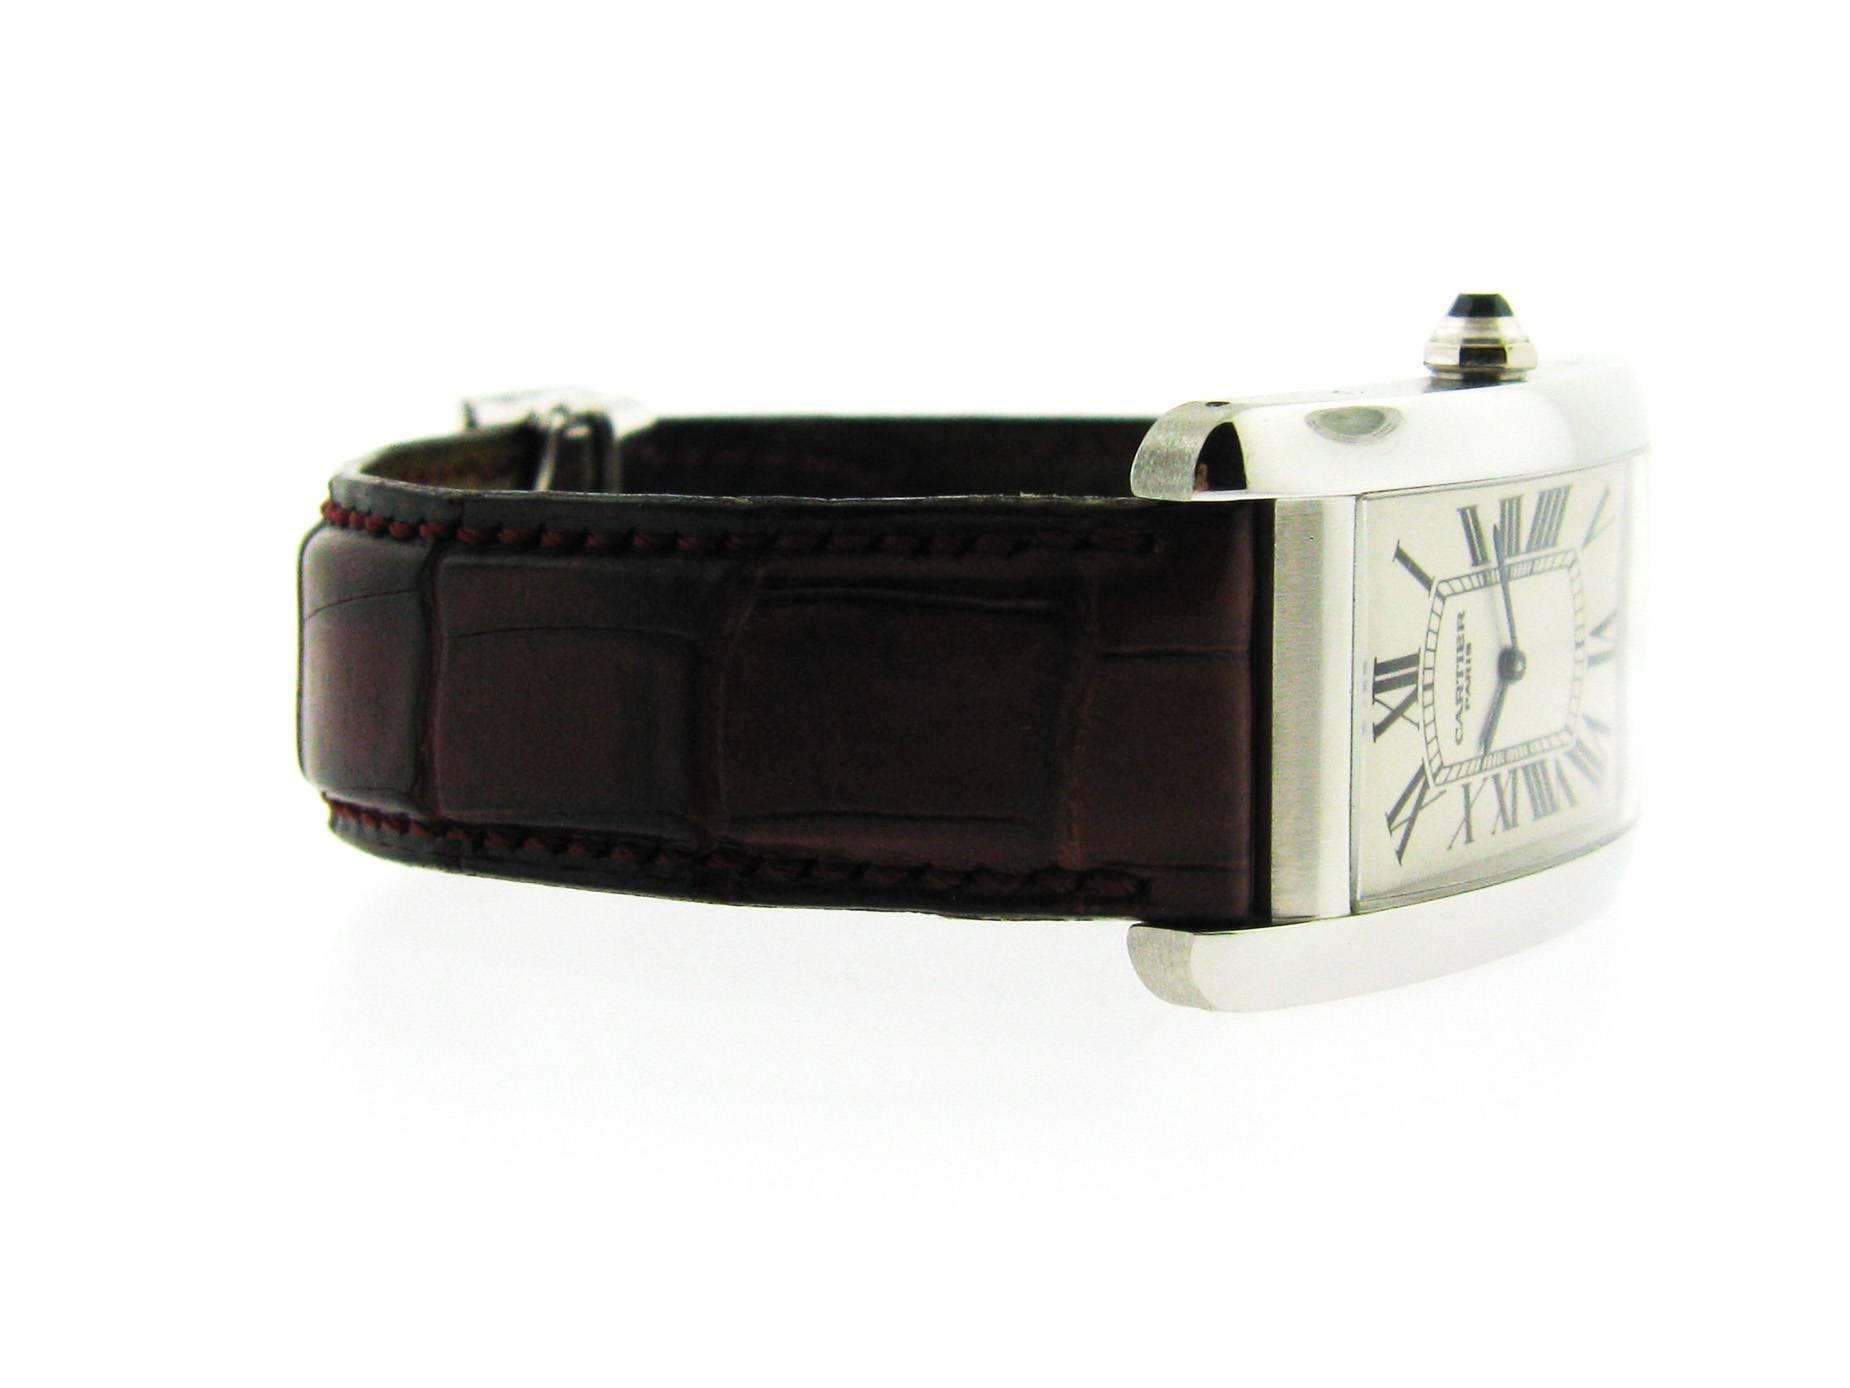 Cartier Tank American, large model Ref. W2604351.  Platinum case measuring approximately 45 x 26 mm, manual wind  movement, natural blue spinel gemstone set in the crown, scratch resistant sapphire crystal and 18-karat white gold deployment type